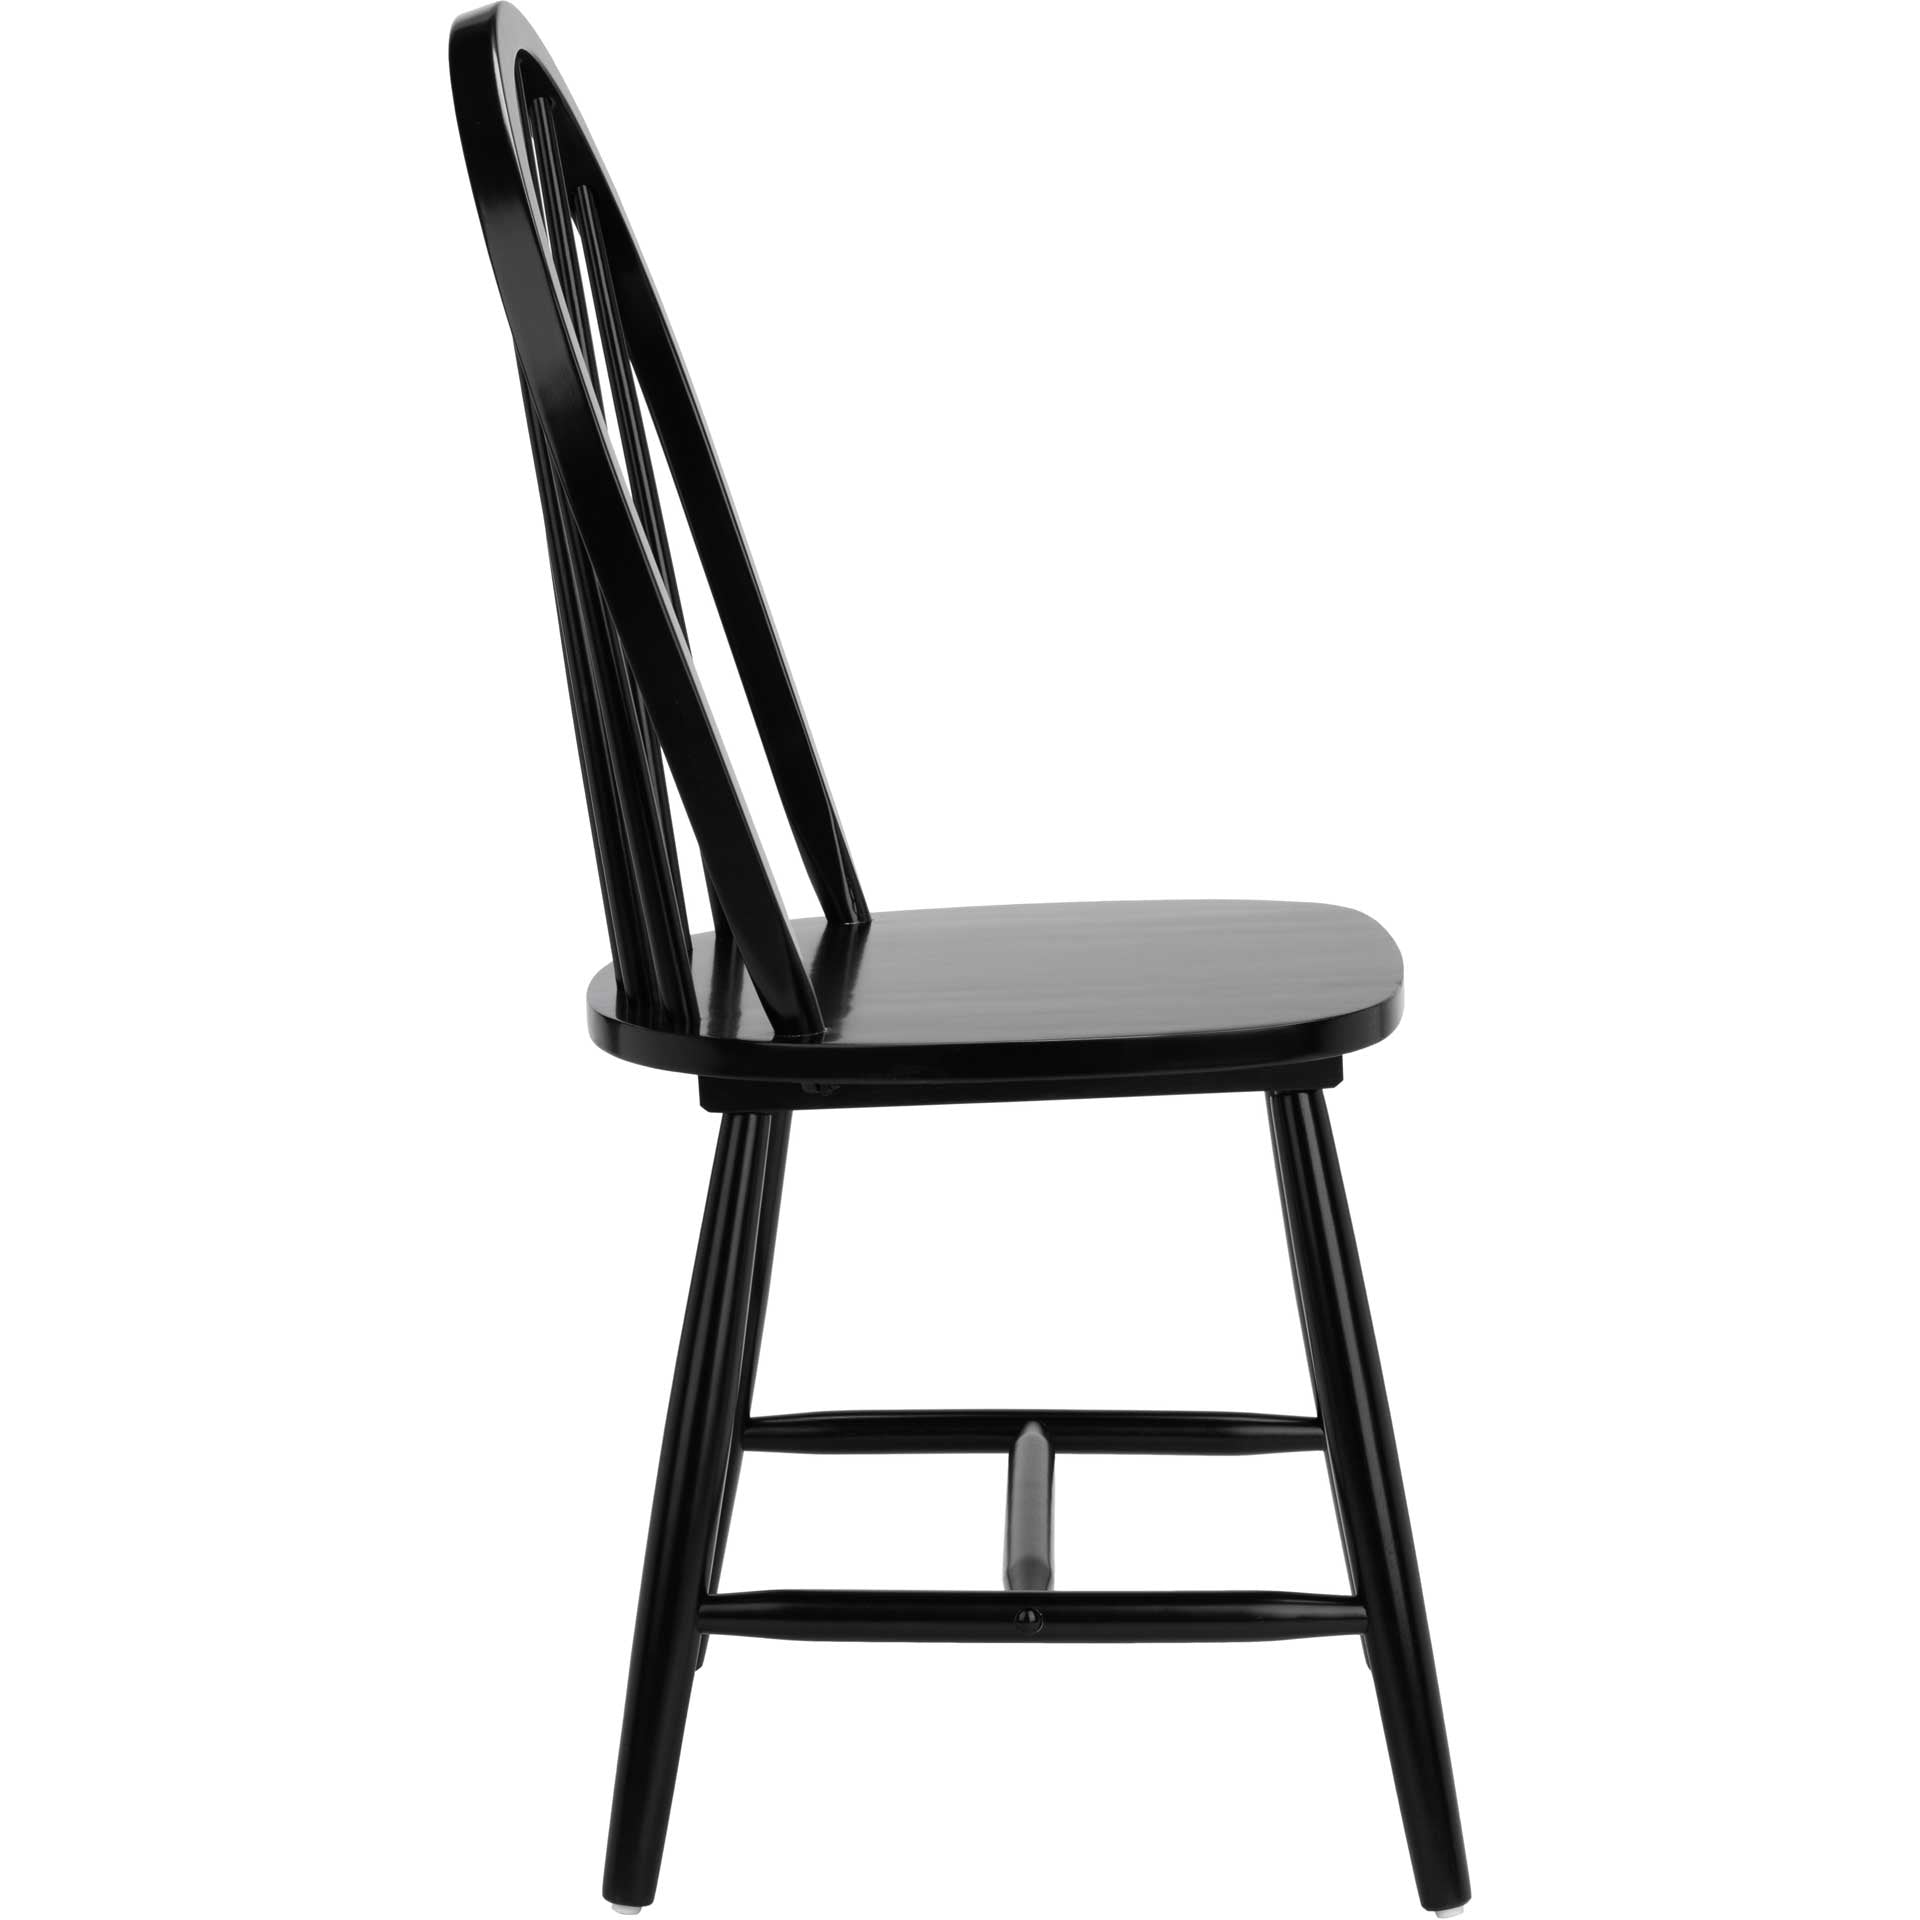 Calista Spindle Back Chair Black (Set of 2)